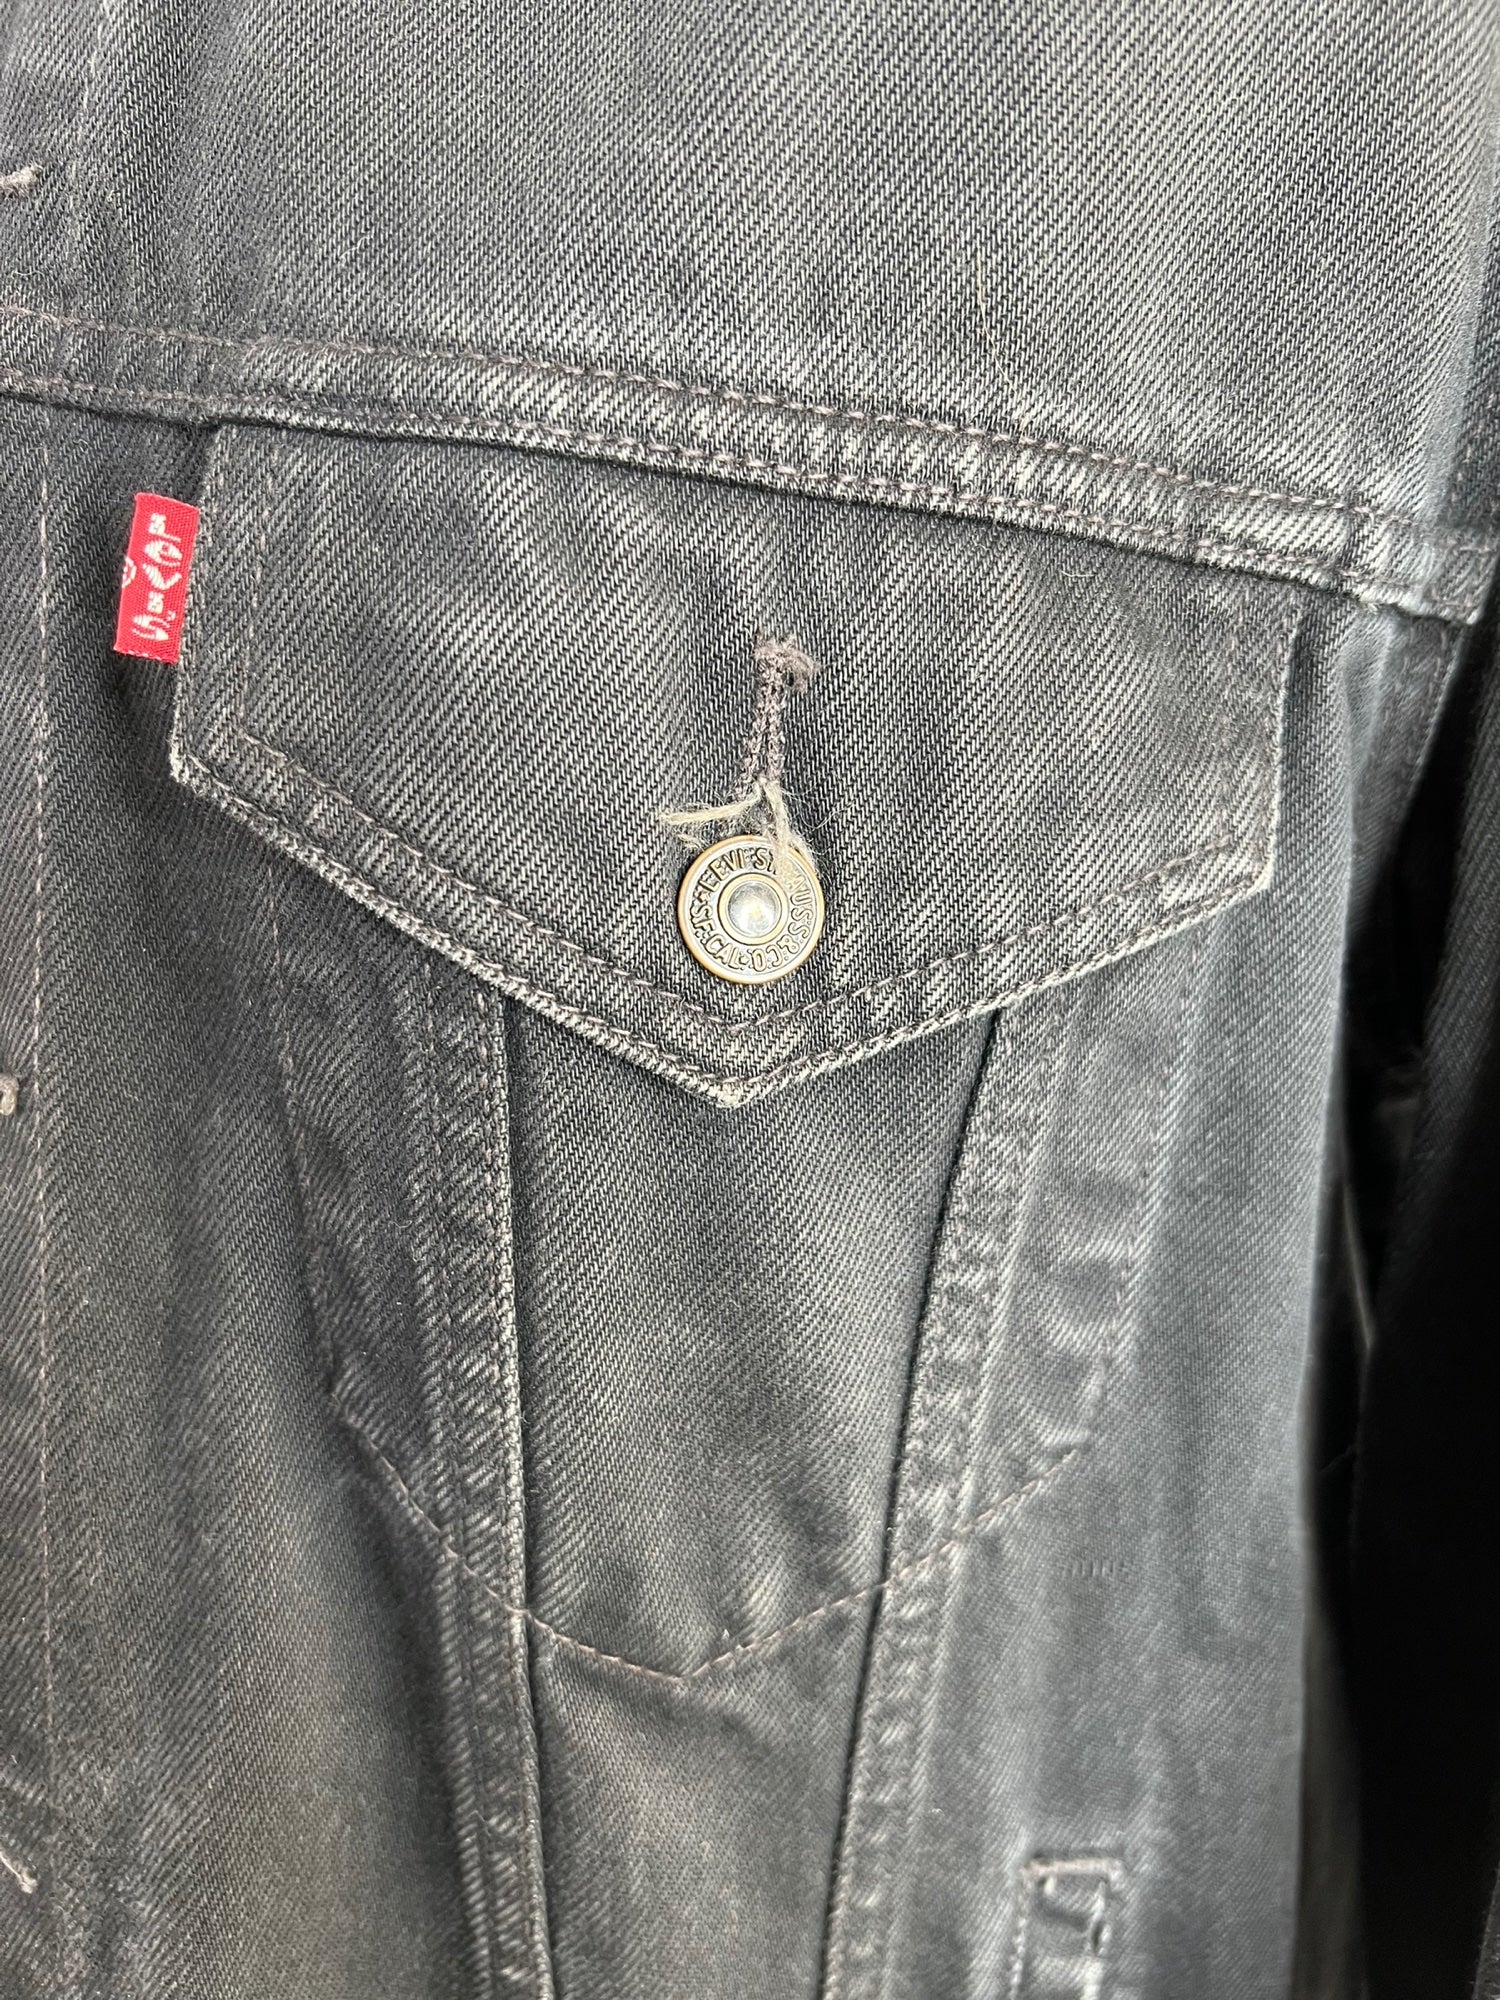 zero waste  XL  vintage  Urban Village Vintage  UK  thrifted  thrift  sustainable  style  store  slow fashion  shop  second hand  save the planet  reuse  red tab  recycled  recycle  recycable  preloved  pockets  online  mens  logo  levis strauss  levis  Jacket  fashion  ethical  Eco friendly  Eco  denim  concious fashion  coat  clothing  clothes  Black Jacket  black  Birmingham